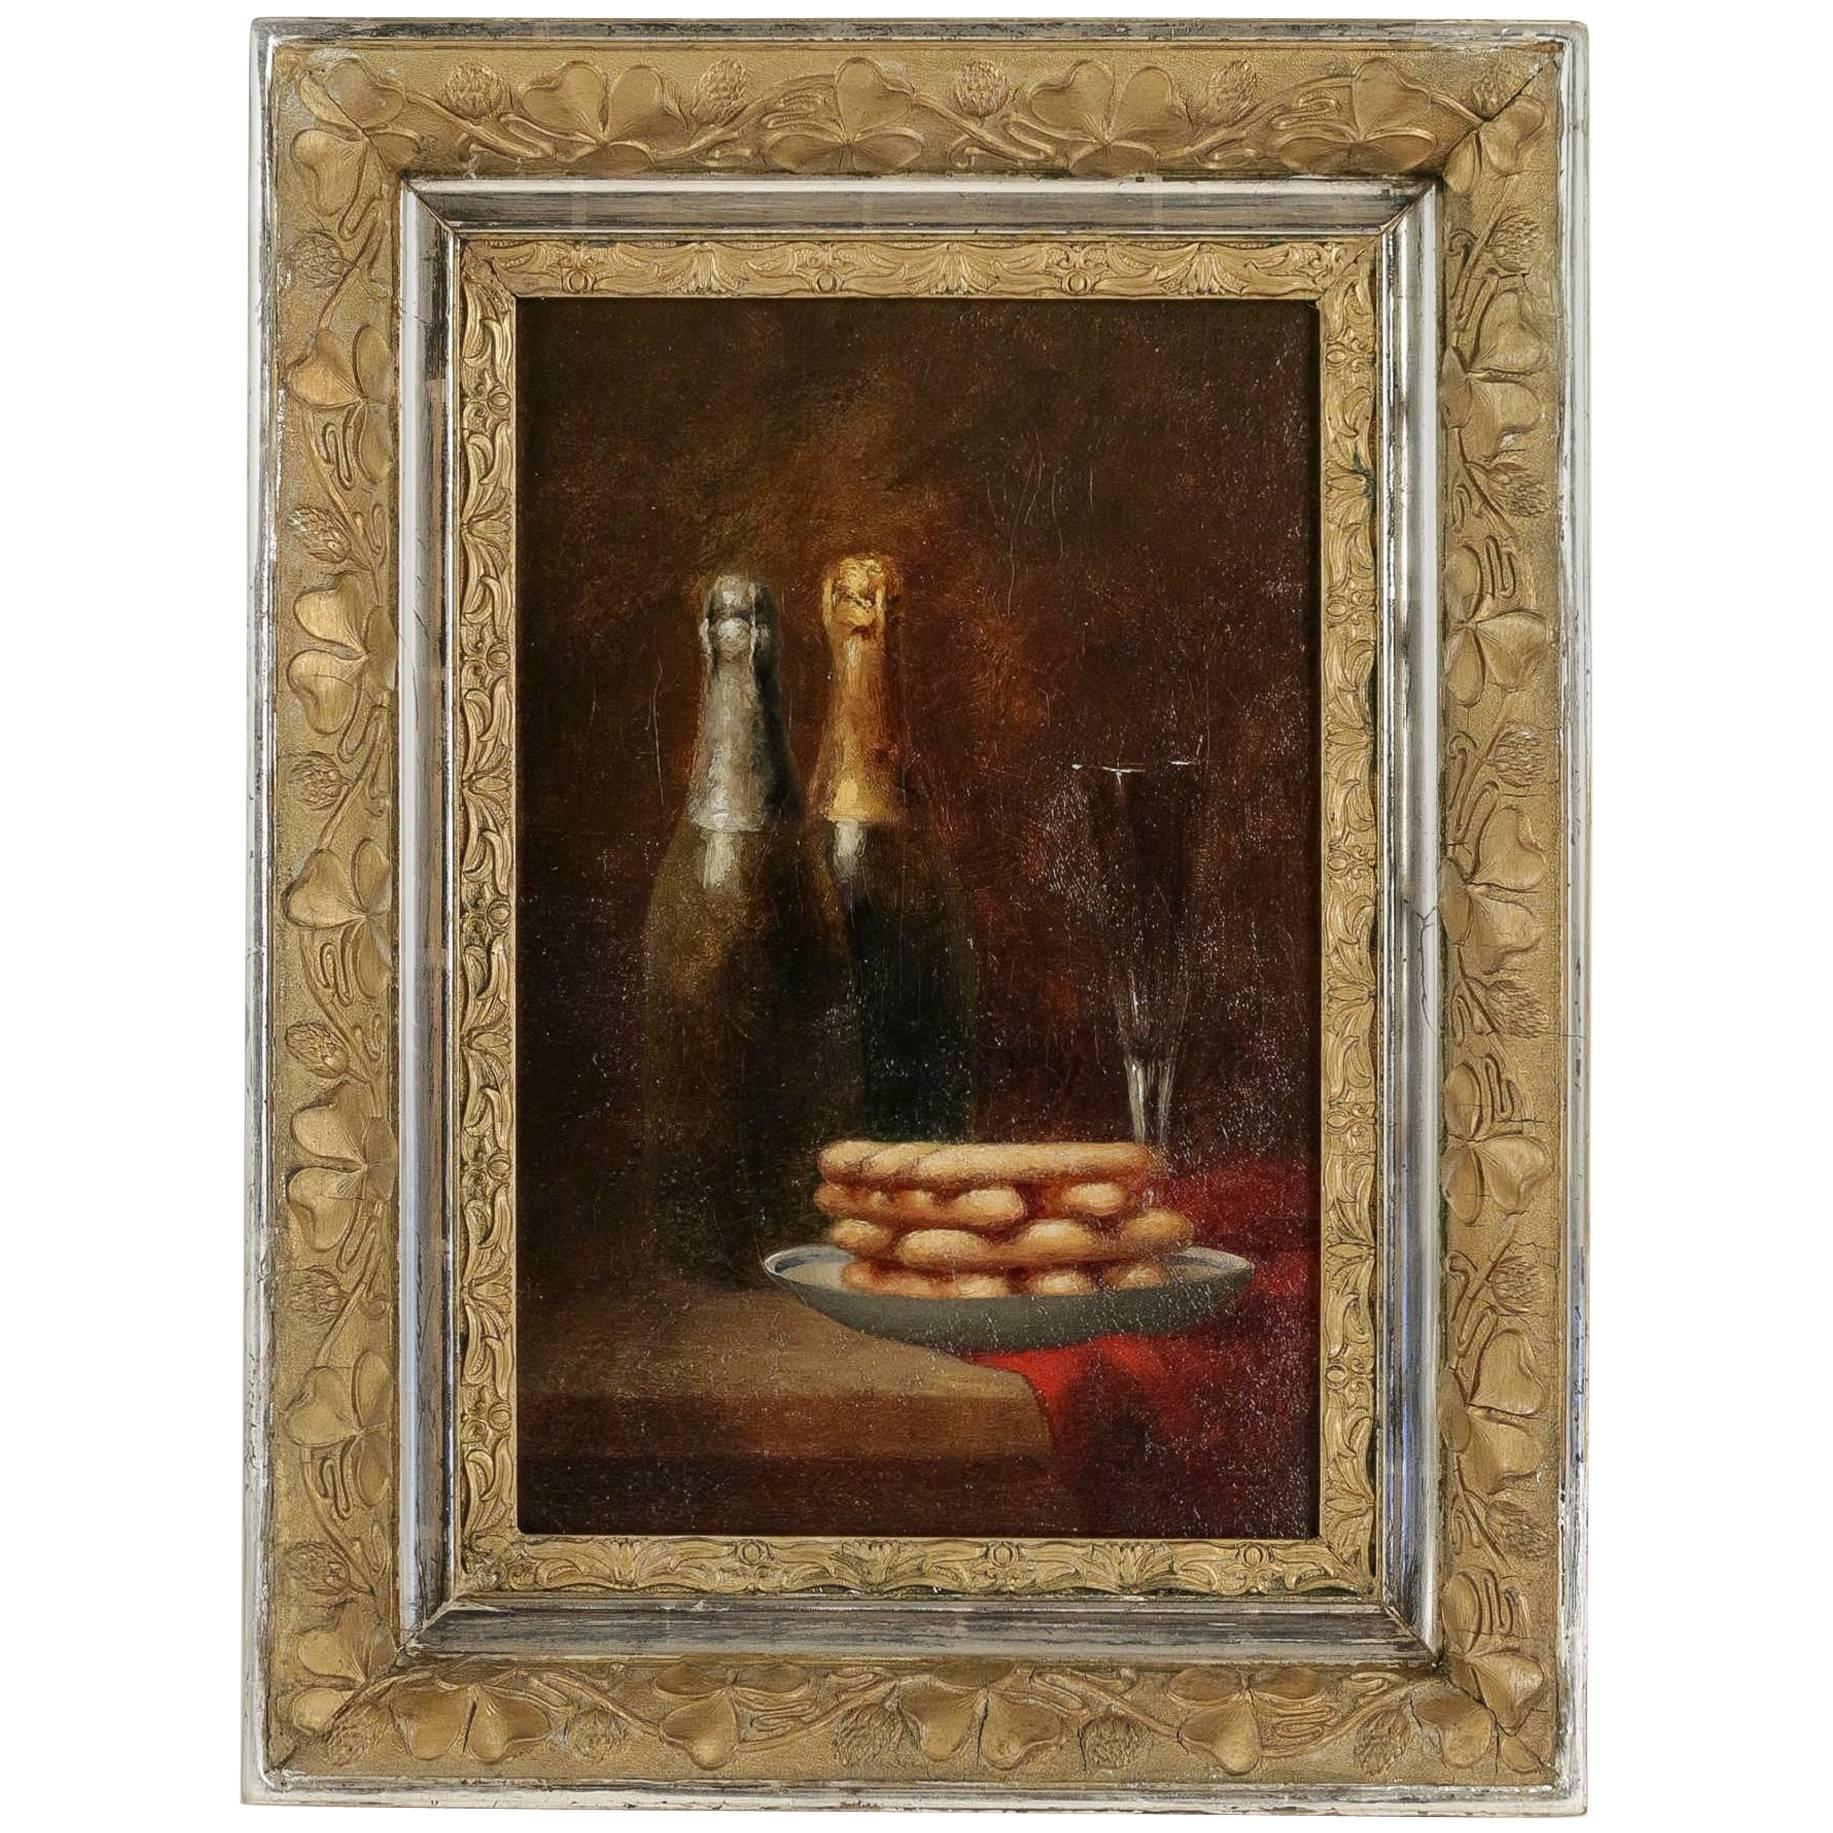 Sign by Charles Boyer, Oil on Canvas, the Champagne Delights, circa 1880-1890